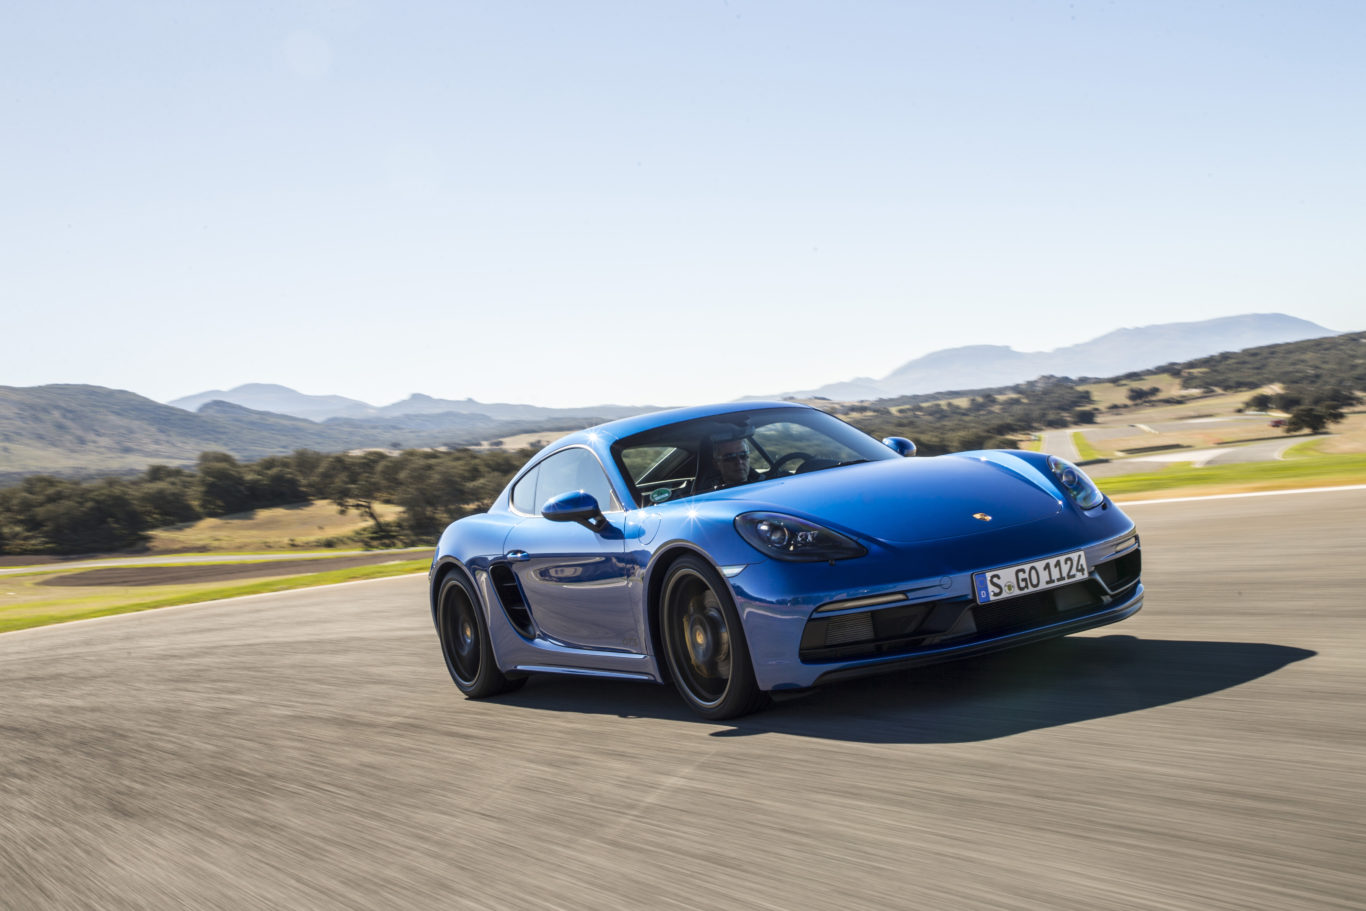 First Drive The Porsche Cayman GTS Gets Better The Harder You Drive It Shropshire Star